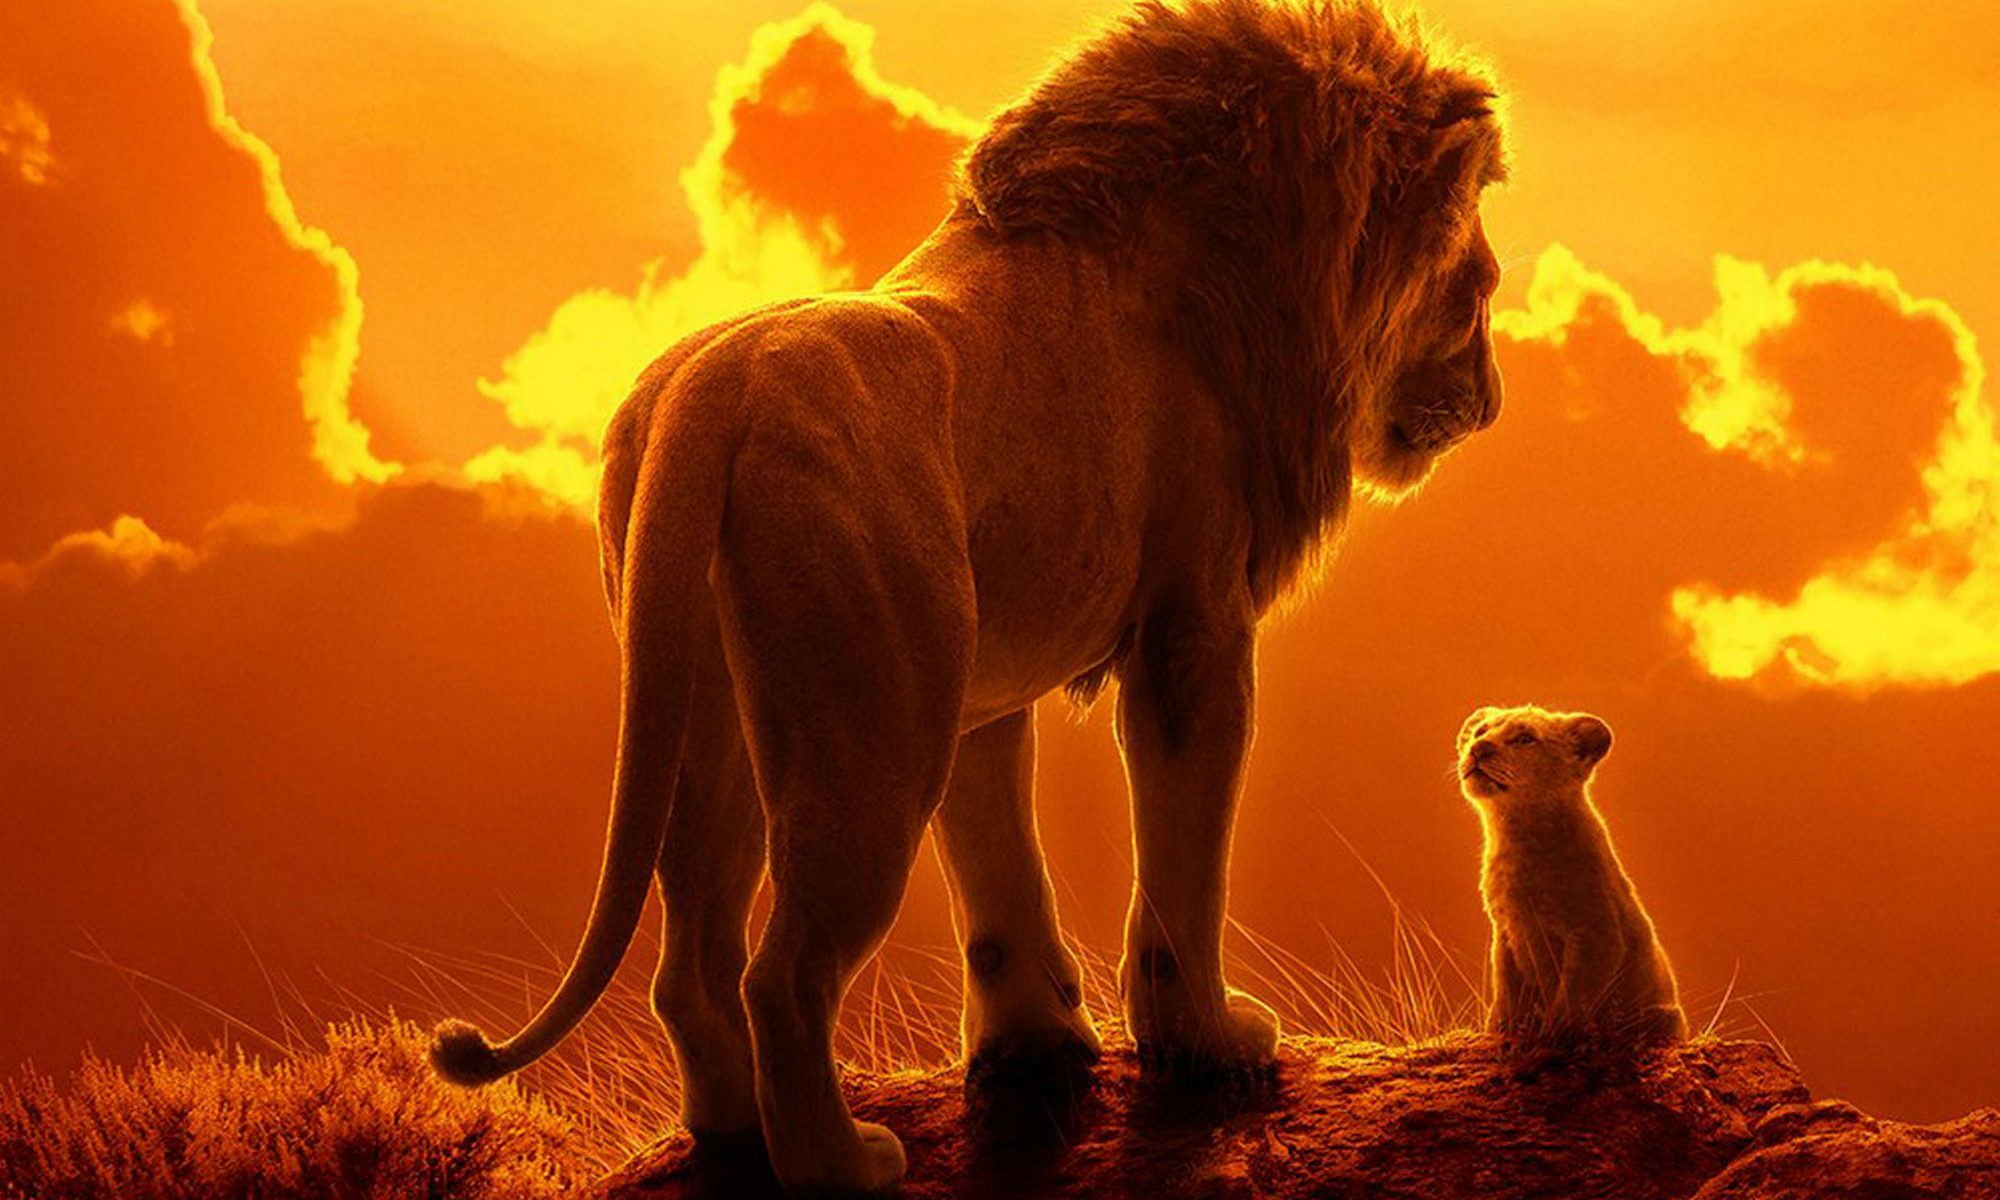 THE LION KING [4DX Review]: No King, But A Formidable Prince.